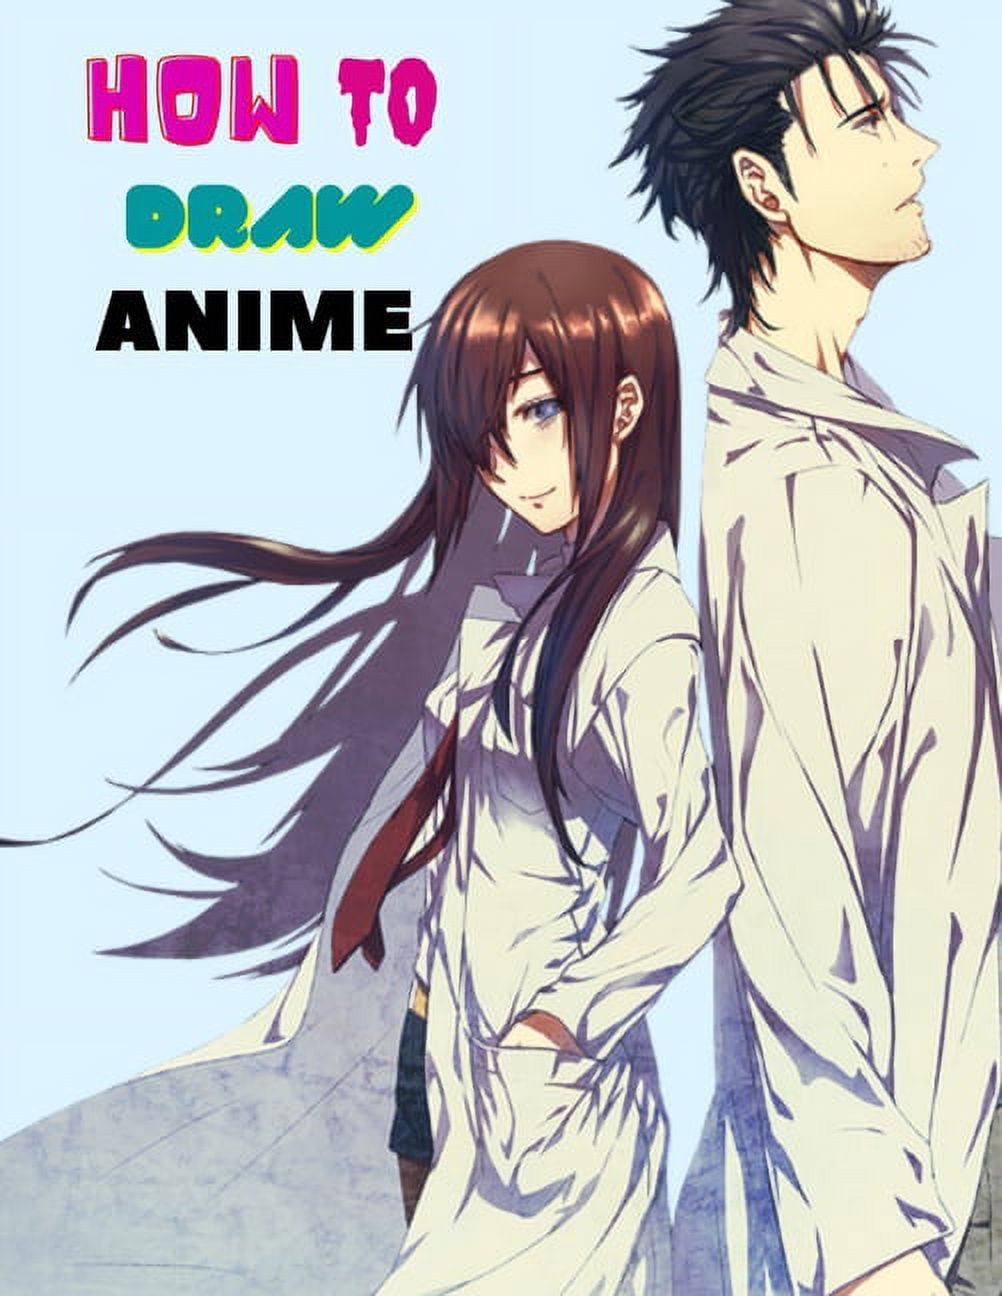  How to Draw Anime Girls: Learn to Draw Awesome Anime